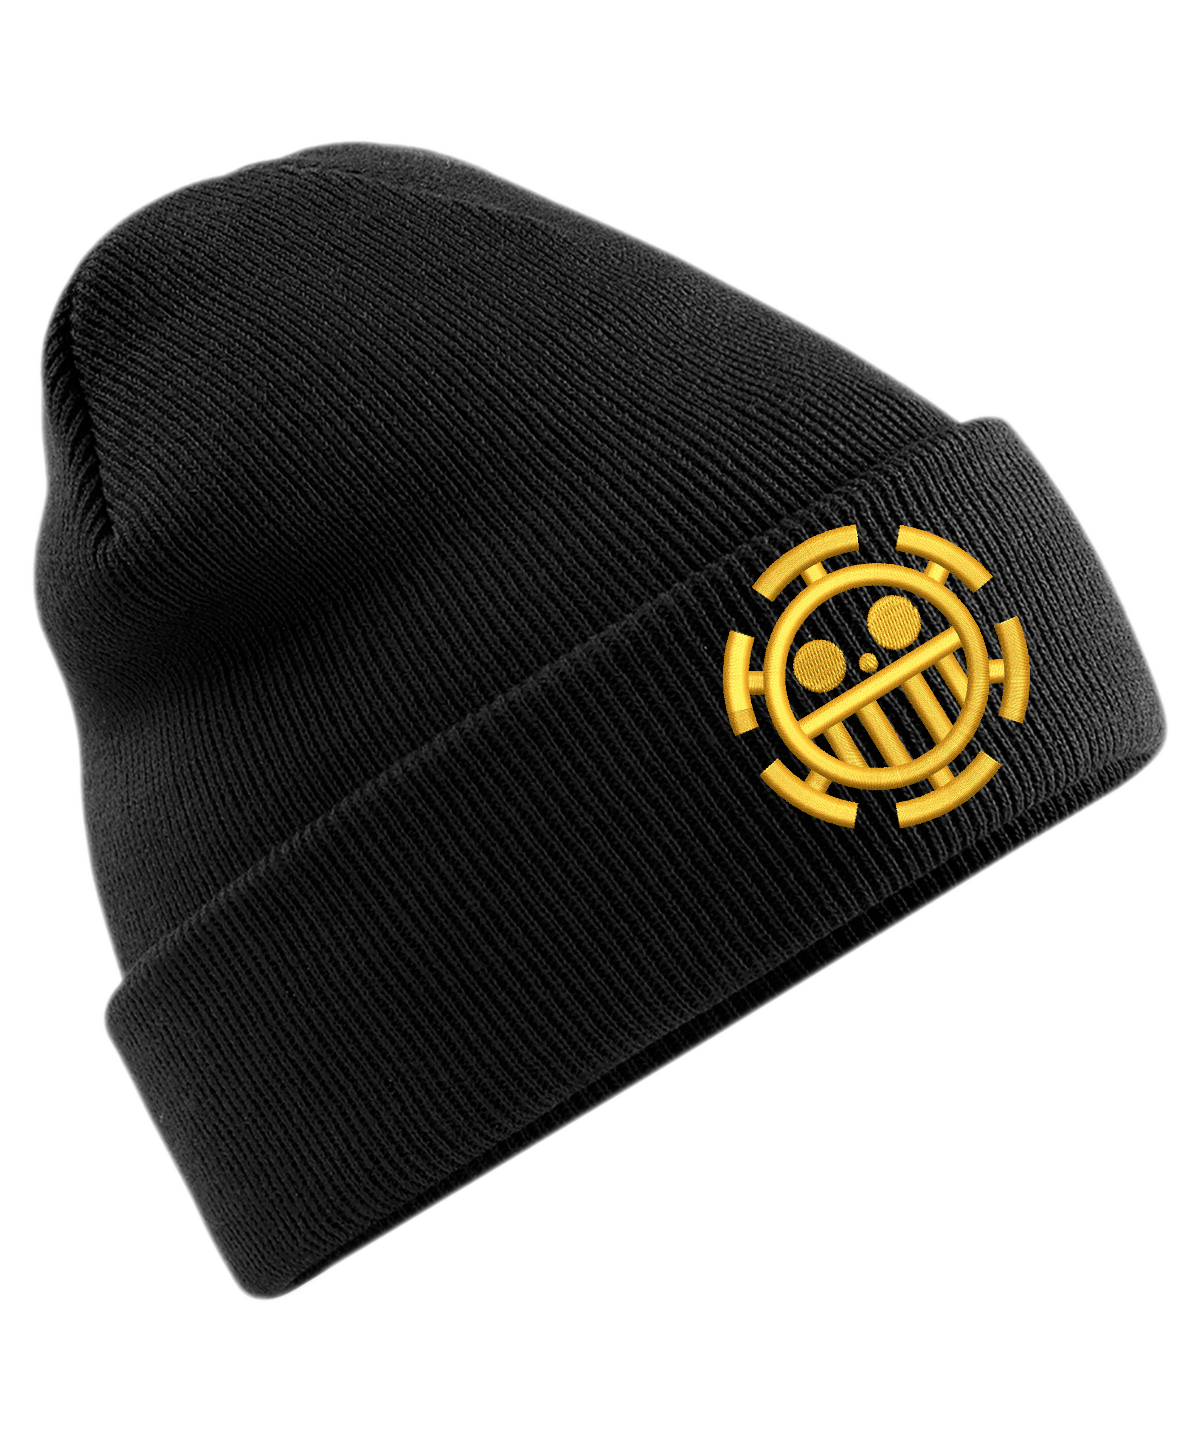 One Piece Embroidery Beanie hat. Ace beanie. smiley face. beanie hats. Anime Embroidered hats.